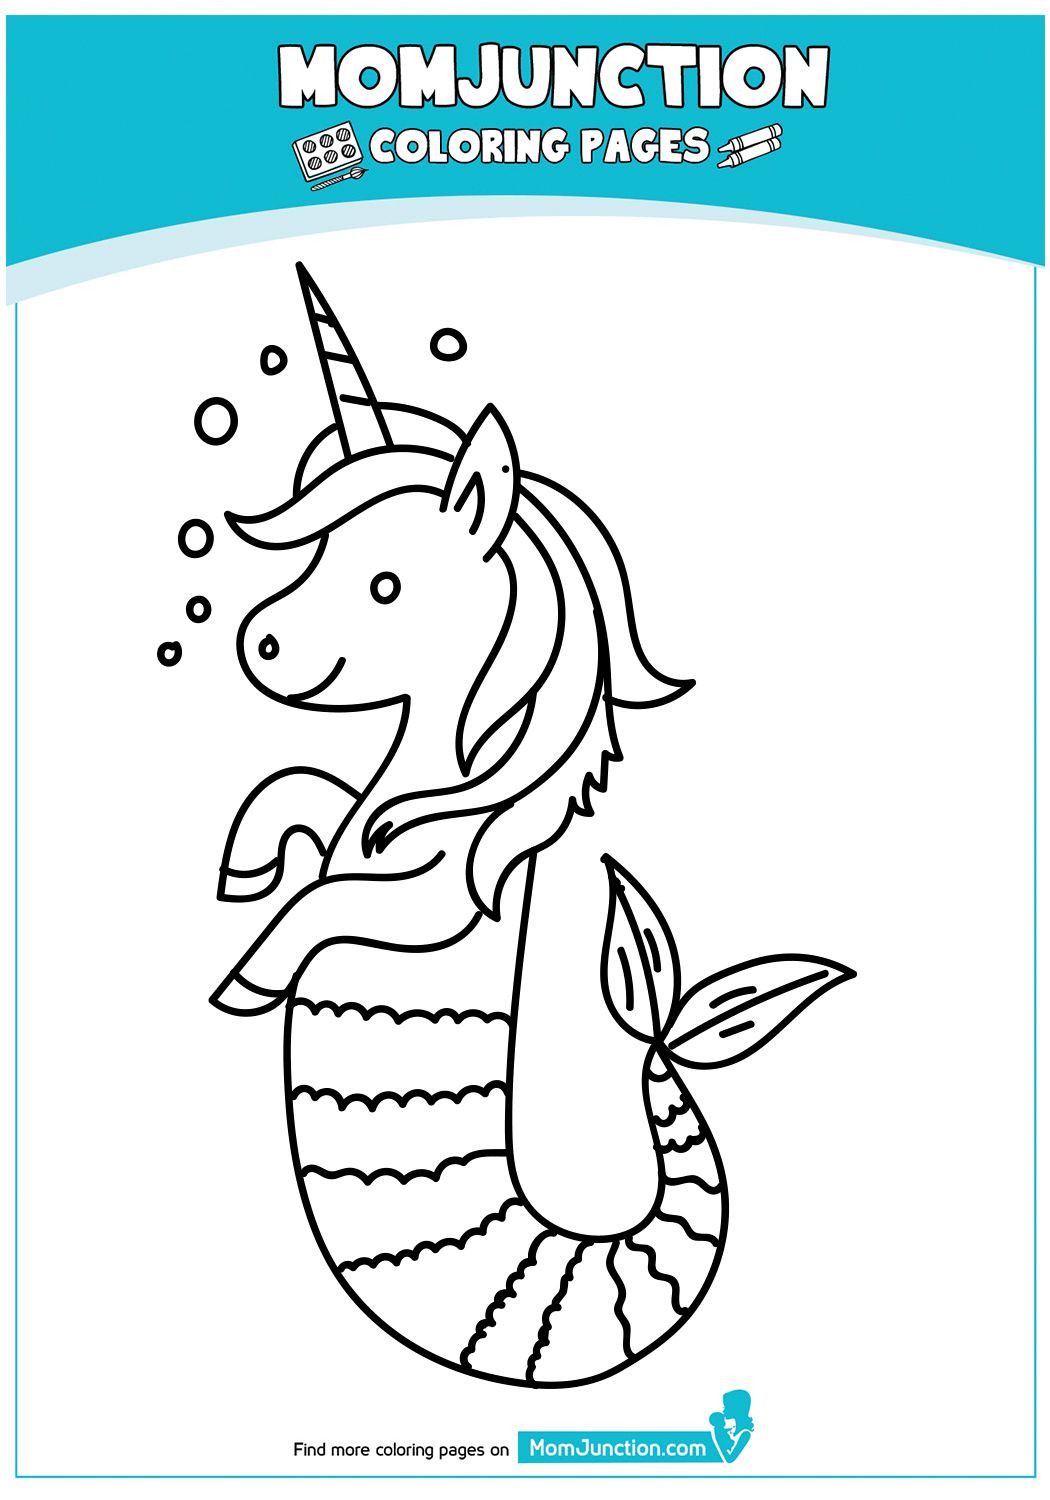 Rainbow Unicorn Mermaid Coloring Pages : Mermaid Coloring Page by